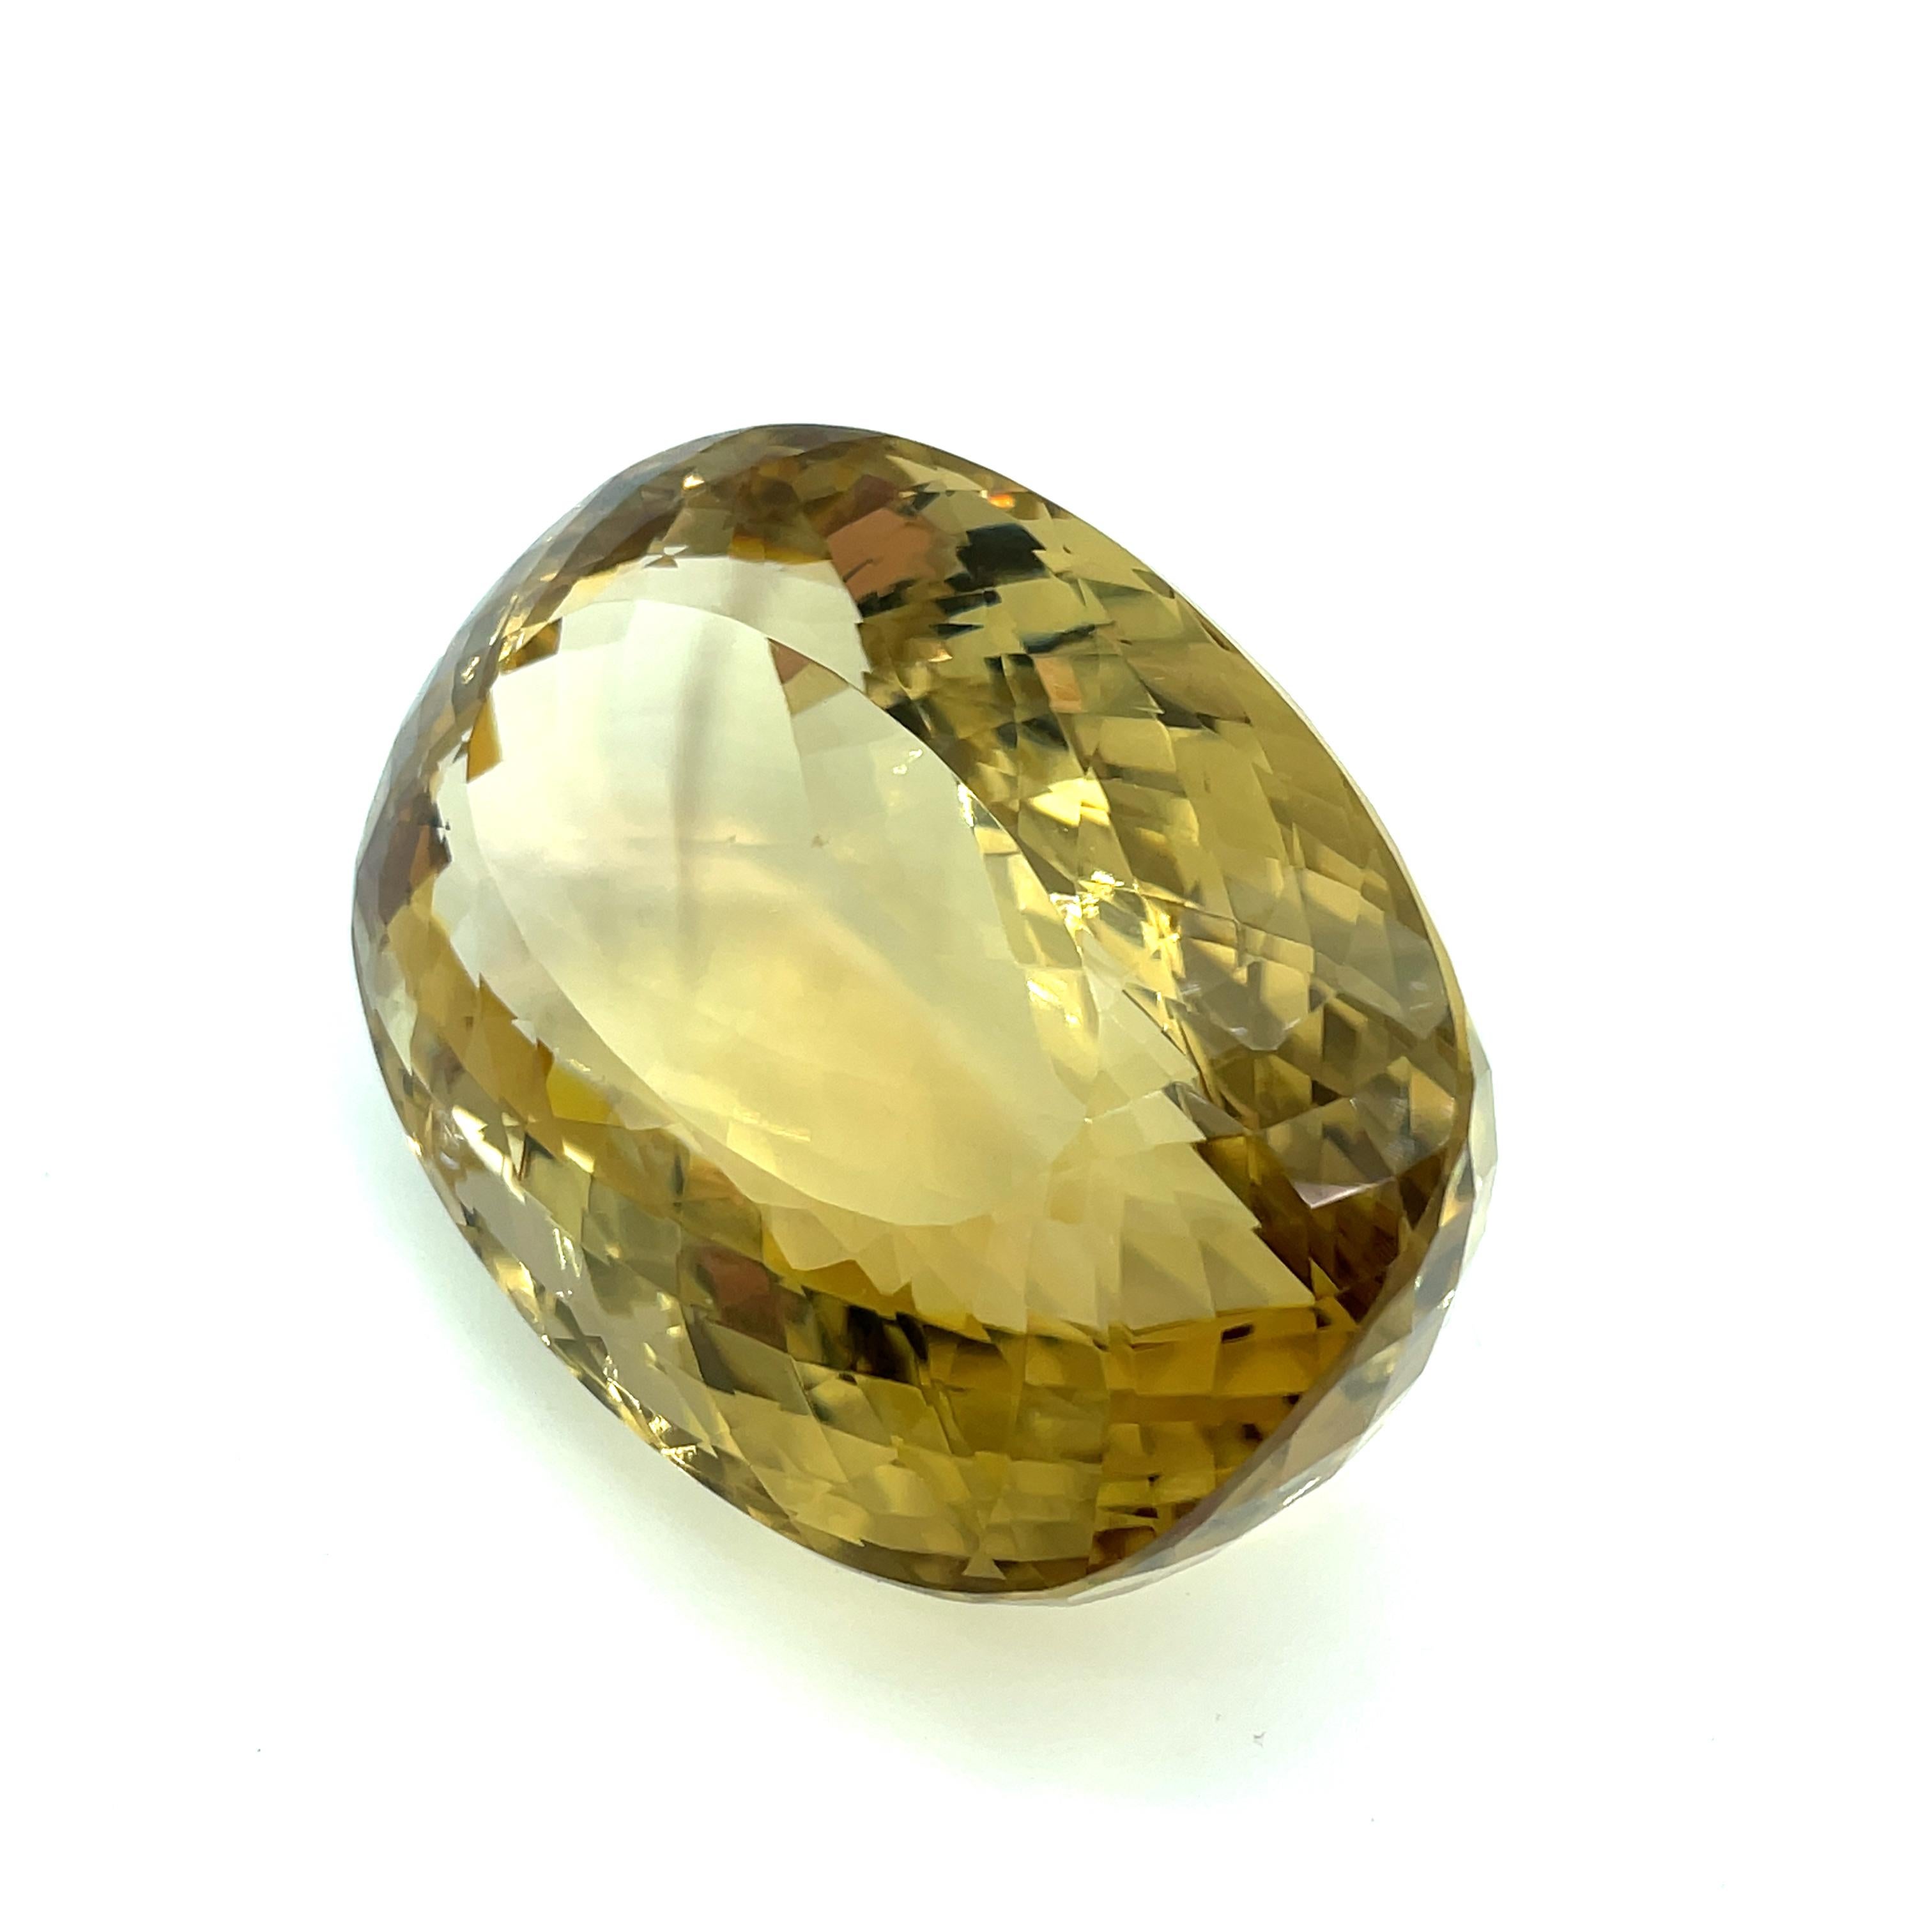 Women's or Men's 1058 Carat Oval Faceted Smoky Quartz Collector Gemstone   For Sale